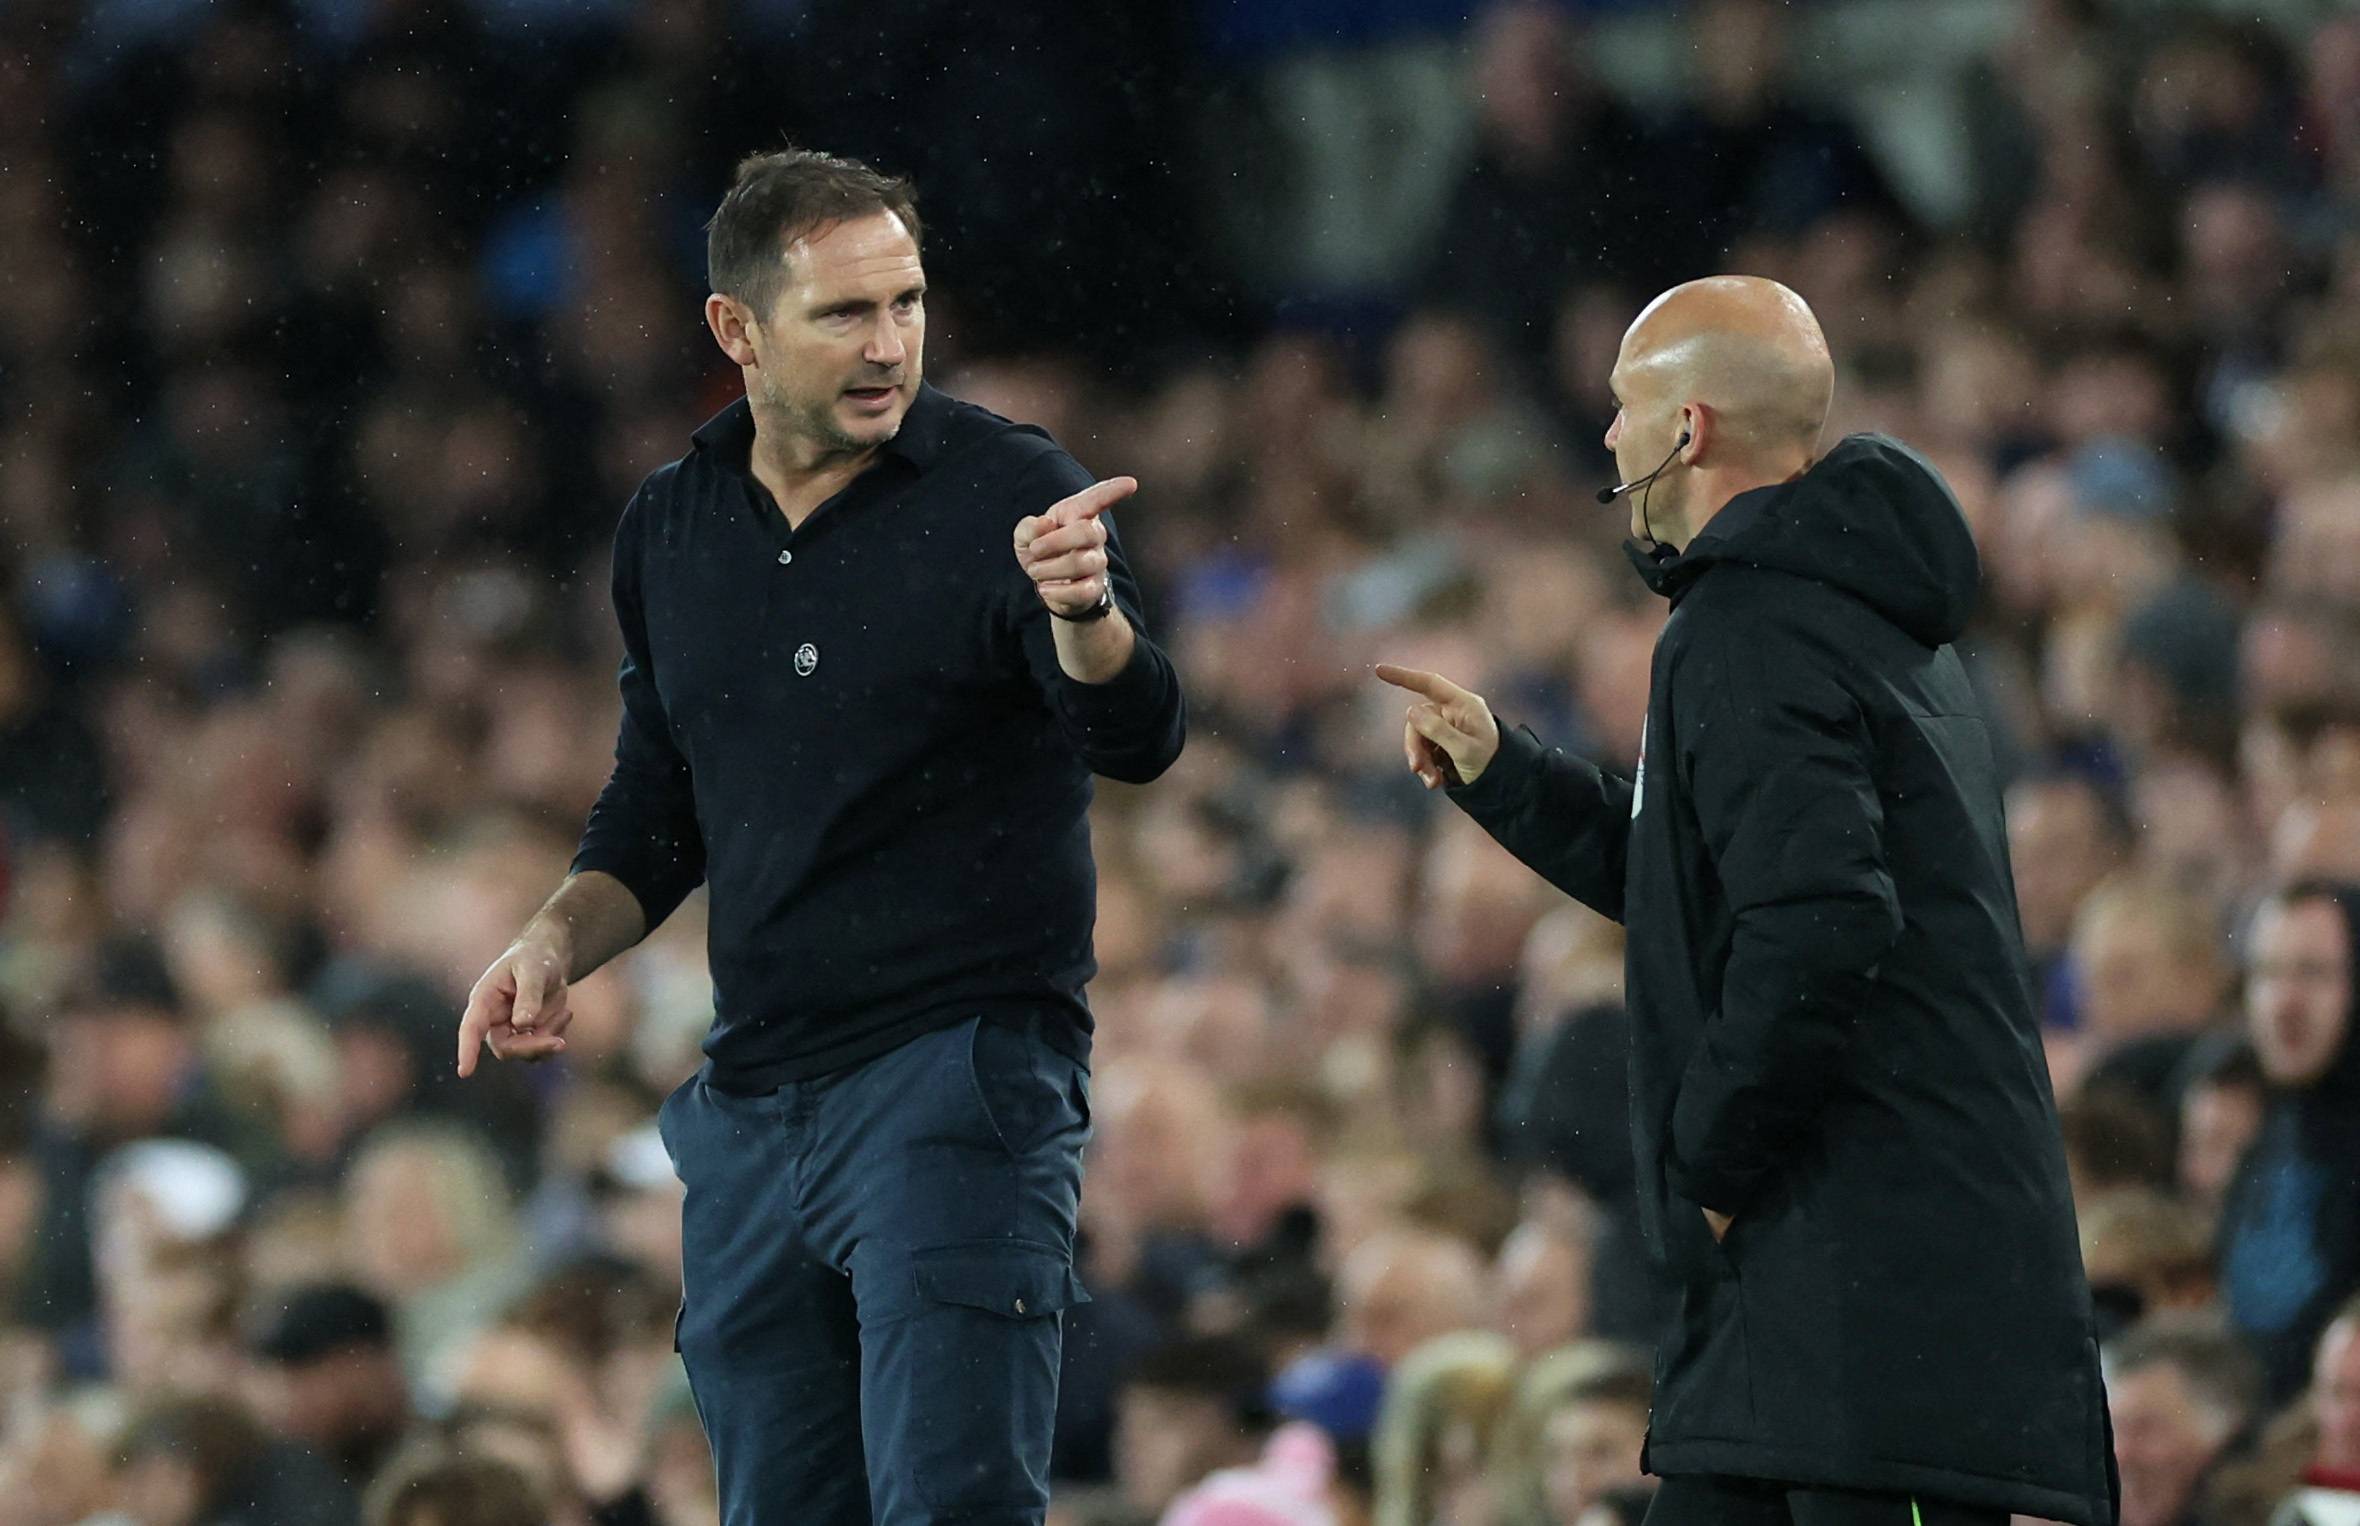 Everton manager Frank Lampard remonstrates with the fourth official